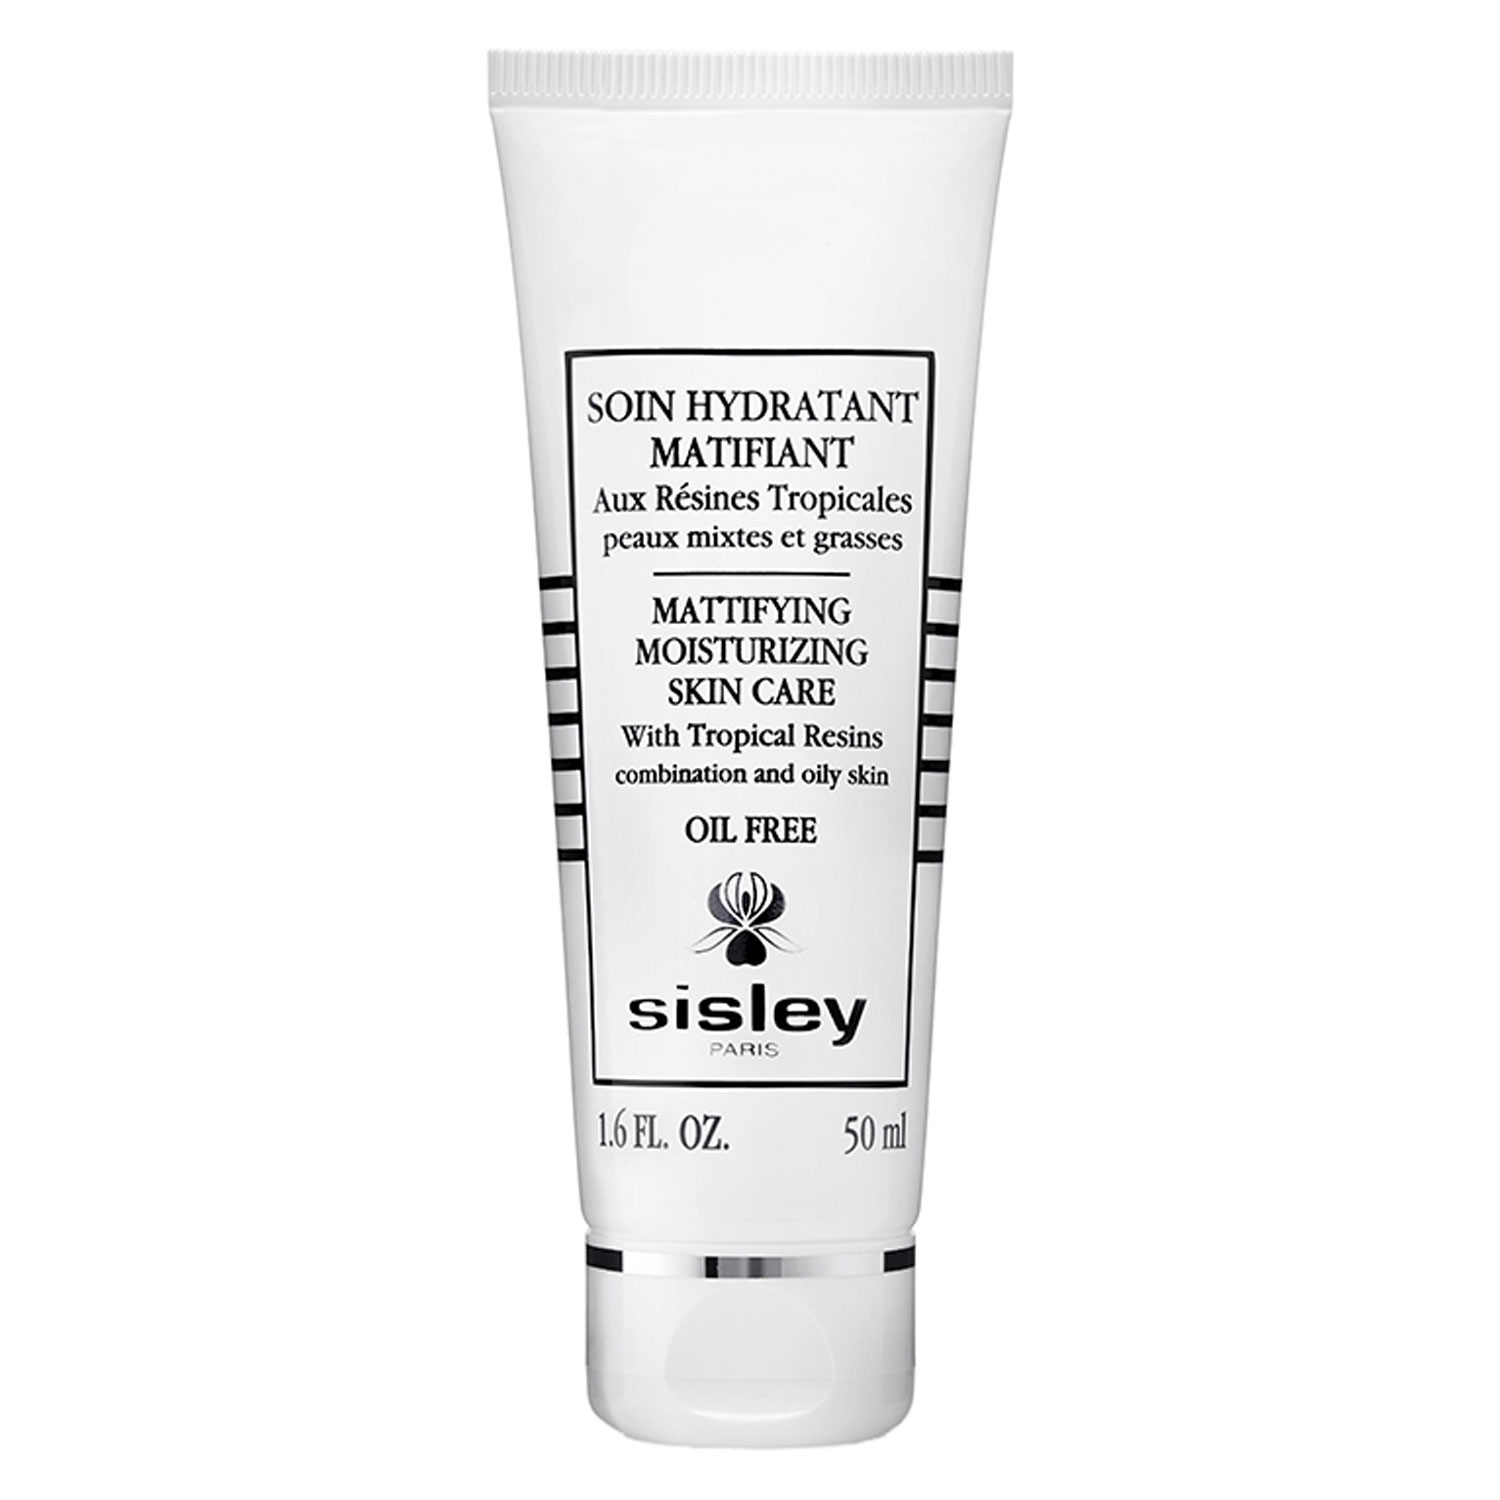 Product image from Sisley Skincare - Soin Hydratant Matifiant aux Résines Tropicales